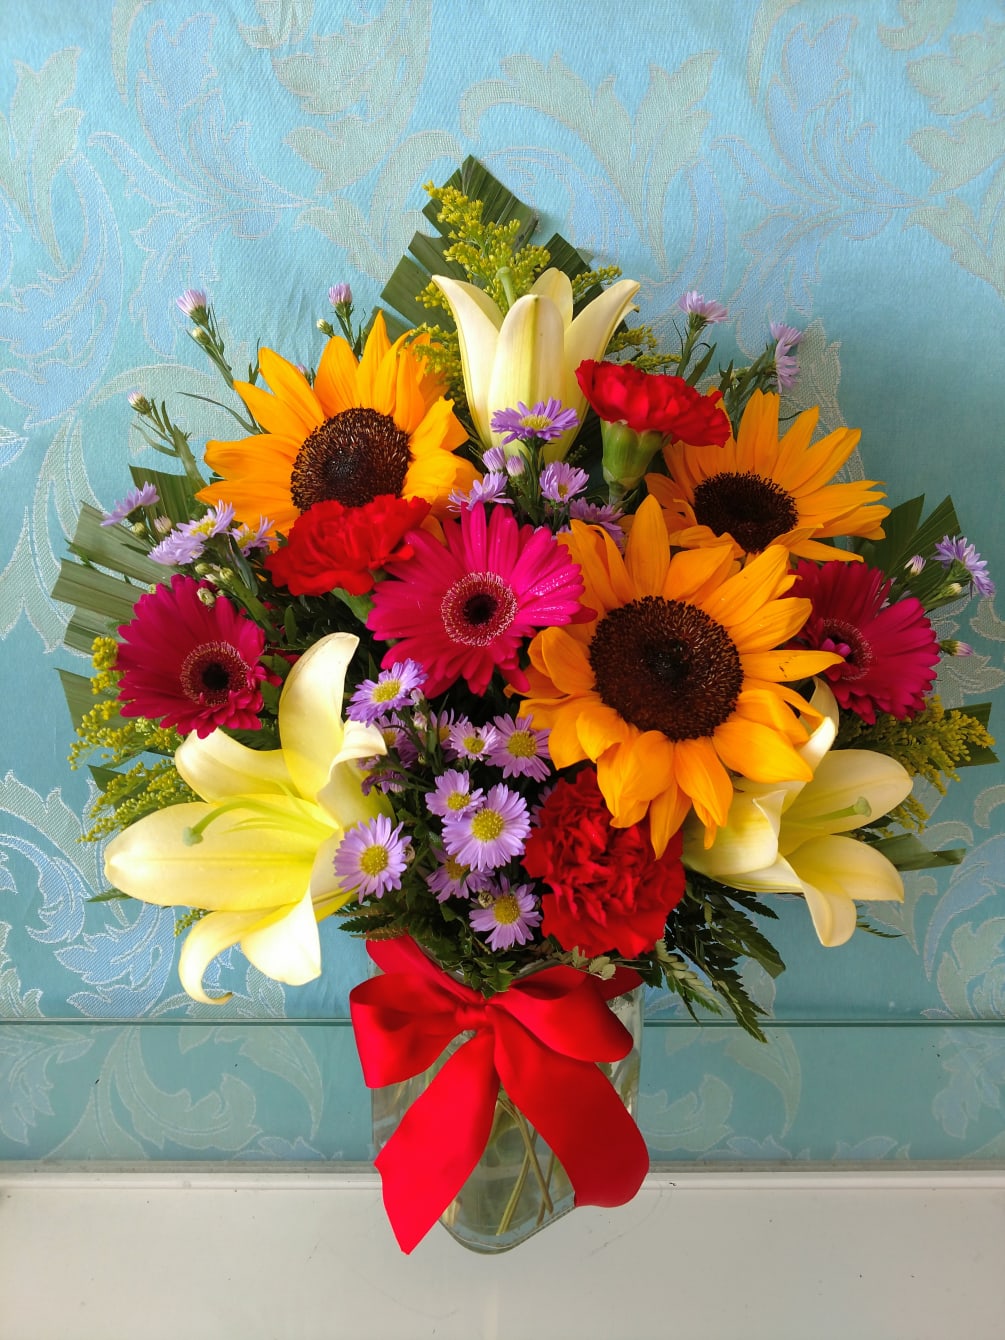 Beautiful garden inspired colors with a mix of sunflowers or gerberas when